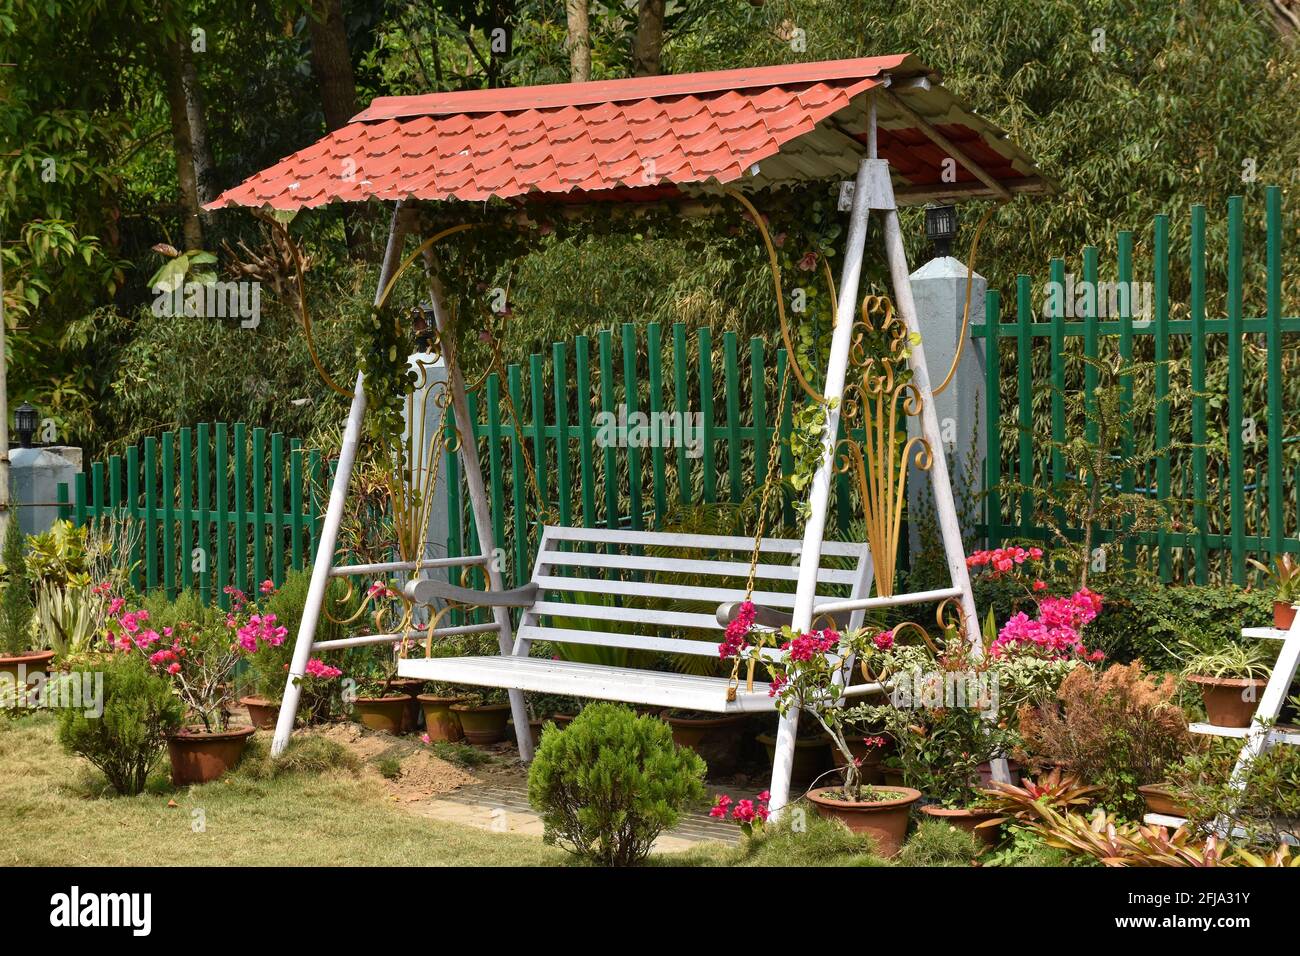 Garden Family swing with red roof Stock Photo